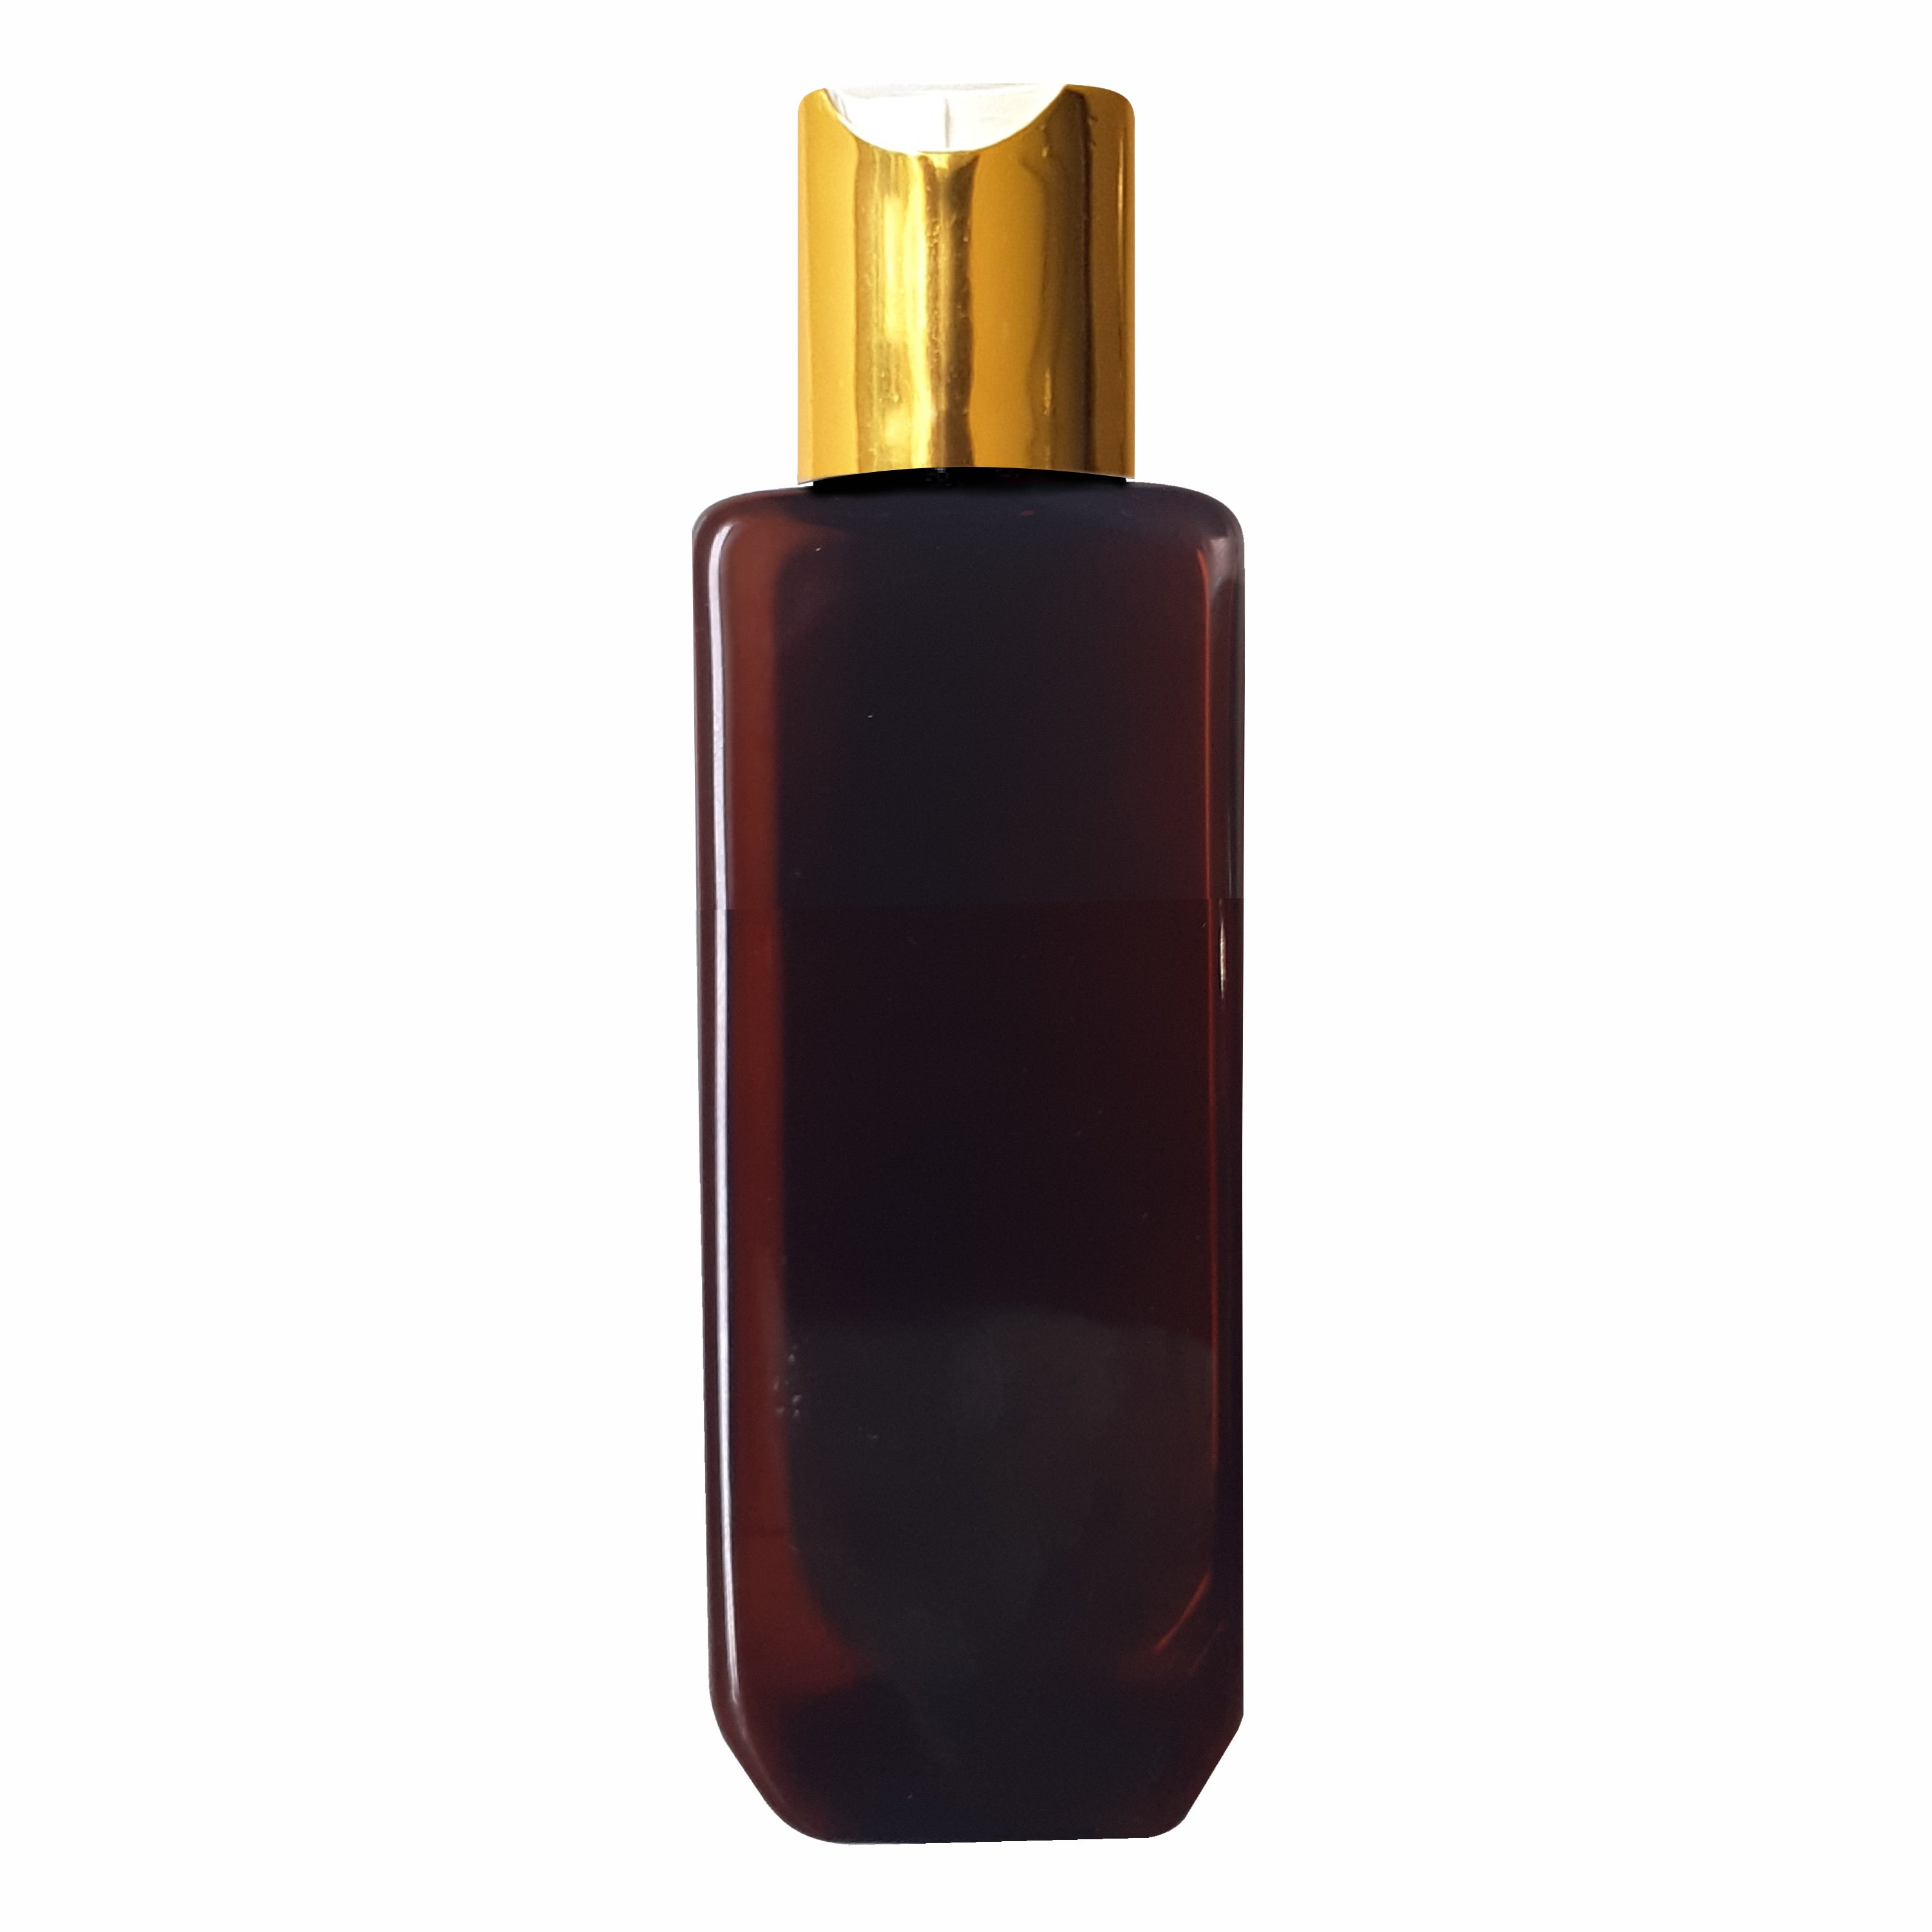 Amber Color Bottle With Golden Disk Top Cap-100ml & 200ml [ZMA09]